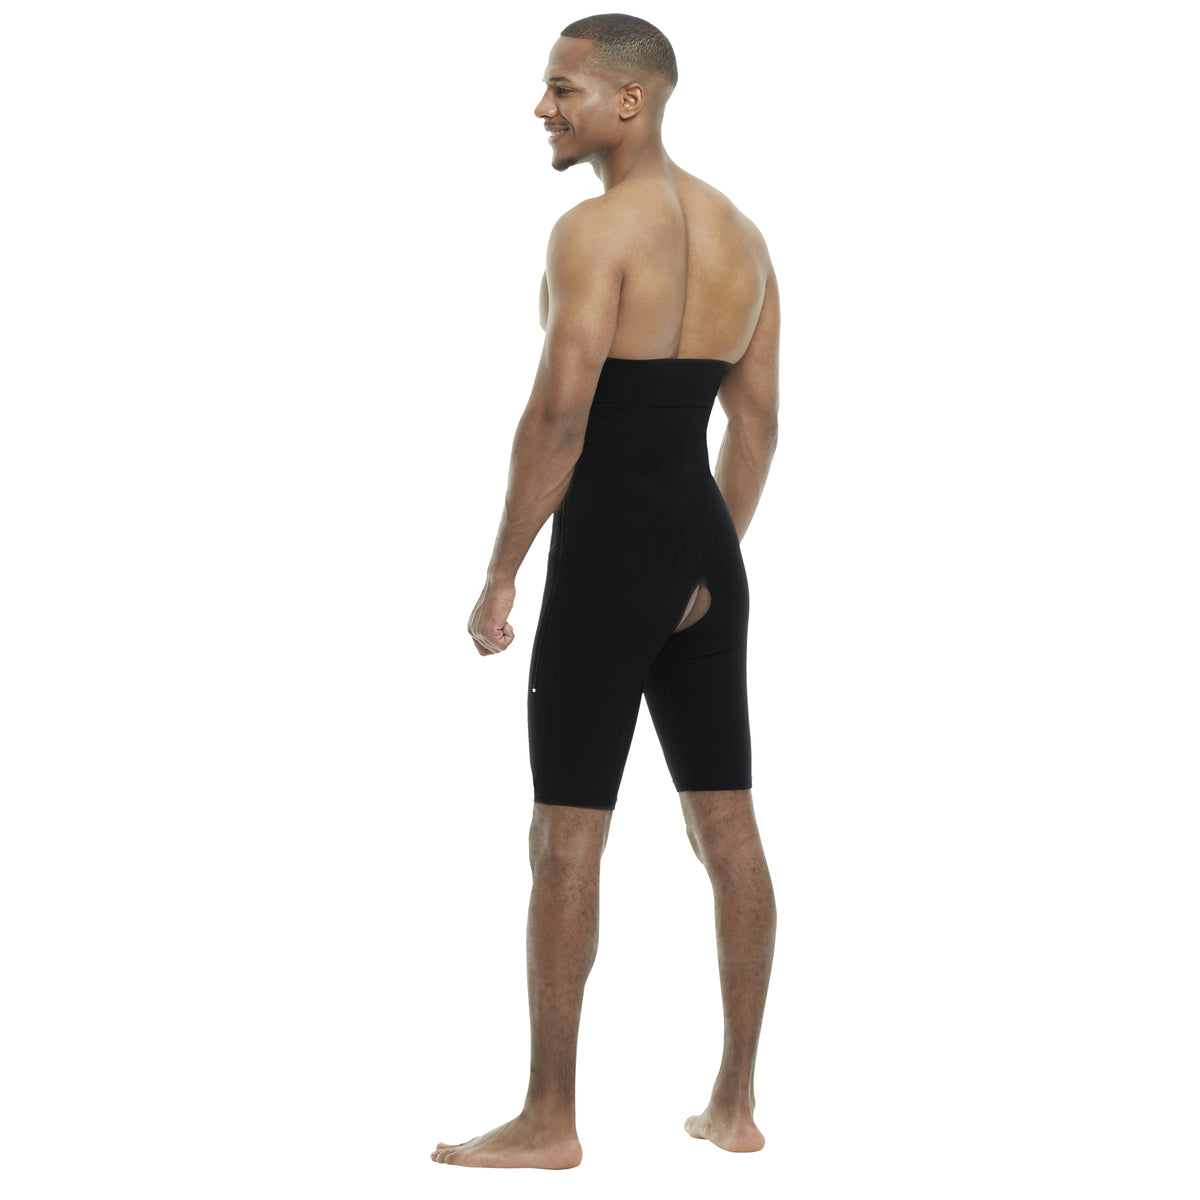 Waistband Below-Knee #460  Clearpoint Medical Canada